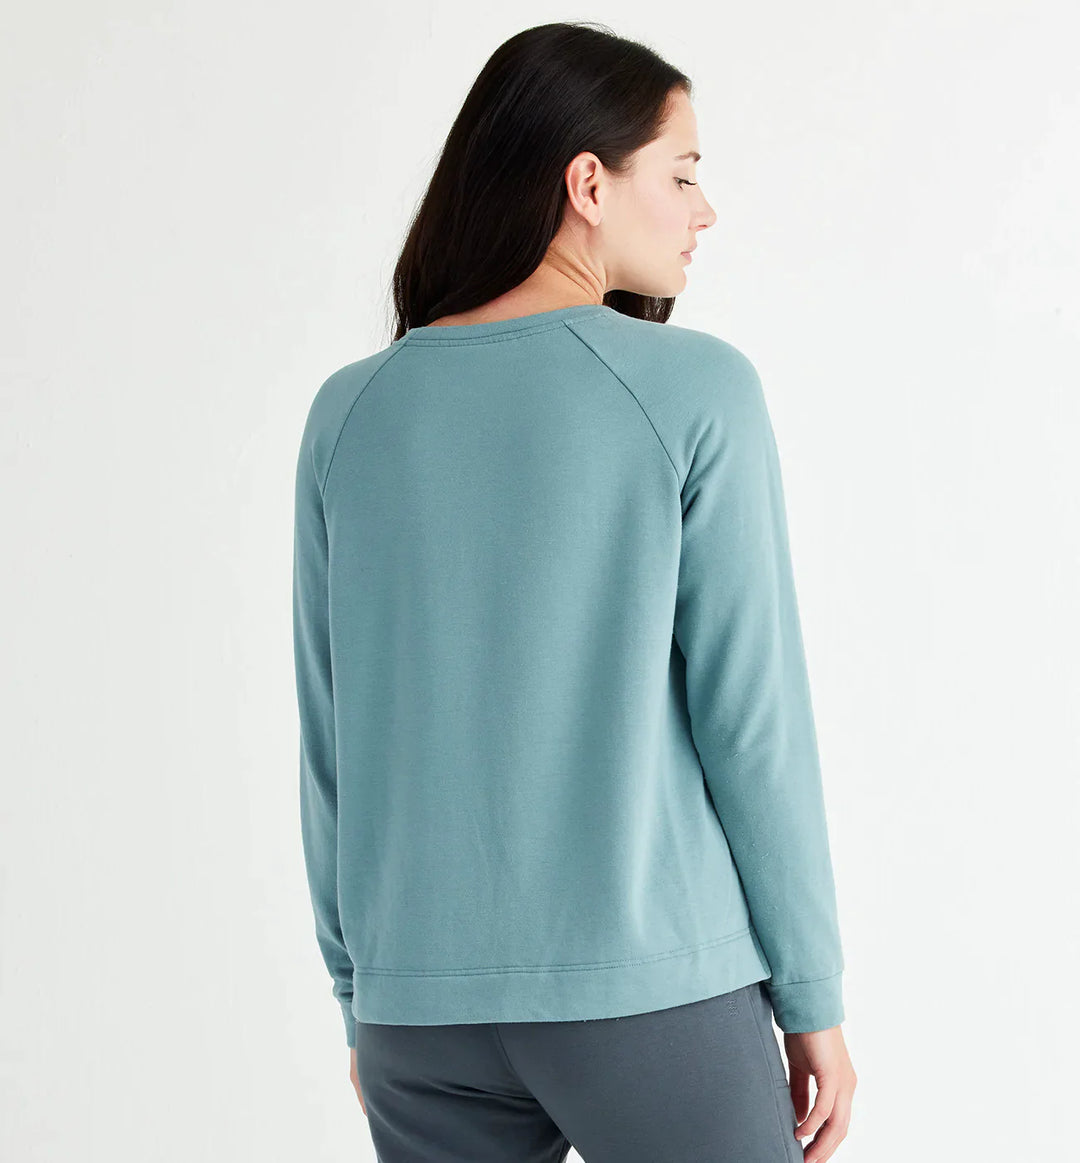 Free Fly Women's Bamboo Lightweight Fleece Crewneck Pullover in Stormy Sea